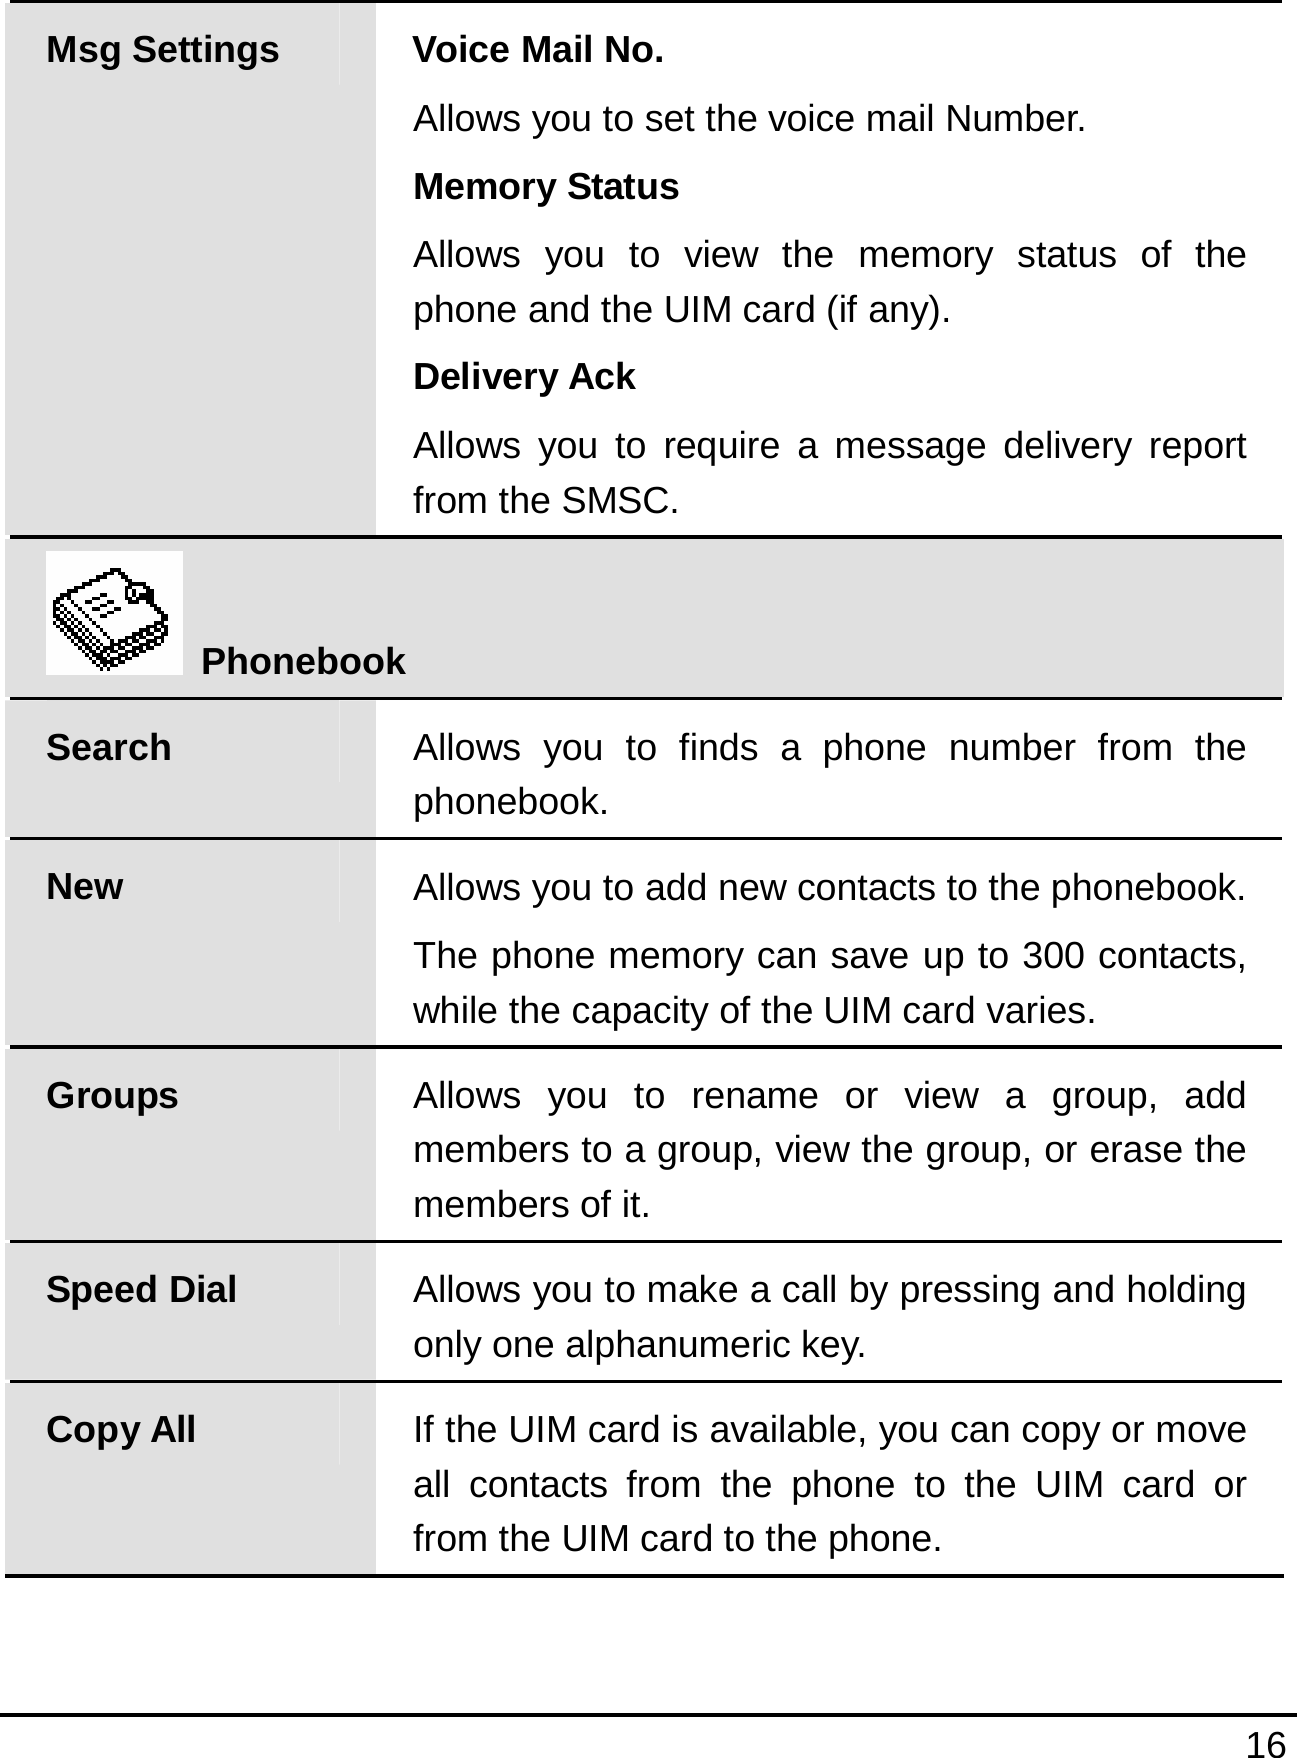   16  Msg Settings  Voice Mail No. Allows you to set the voice mail Number. Memory Status Allows you to view the memory status of the phone and the UIM card (if any). Delivery Ack Allows you to require a message delivery report from the SMSC.  Phonebook Search  Allows you to finds a phone number from the phonebook. New  Allows you to add new contacts to the phonebook.The phone memory can save up to 300 contacts, while the capacity of the UIM card varies. Groups  Allows you to rename or view a group, add members to a group, view the group, or erase the members of it. Speed Dial  Allows you to make a call by pressing and holding only one alphanumeric key. Copy All  If the UIM card is available, you can copy or move all contacts from the phone to the UIM card or from the UIM card to the phone. 